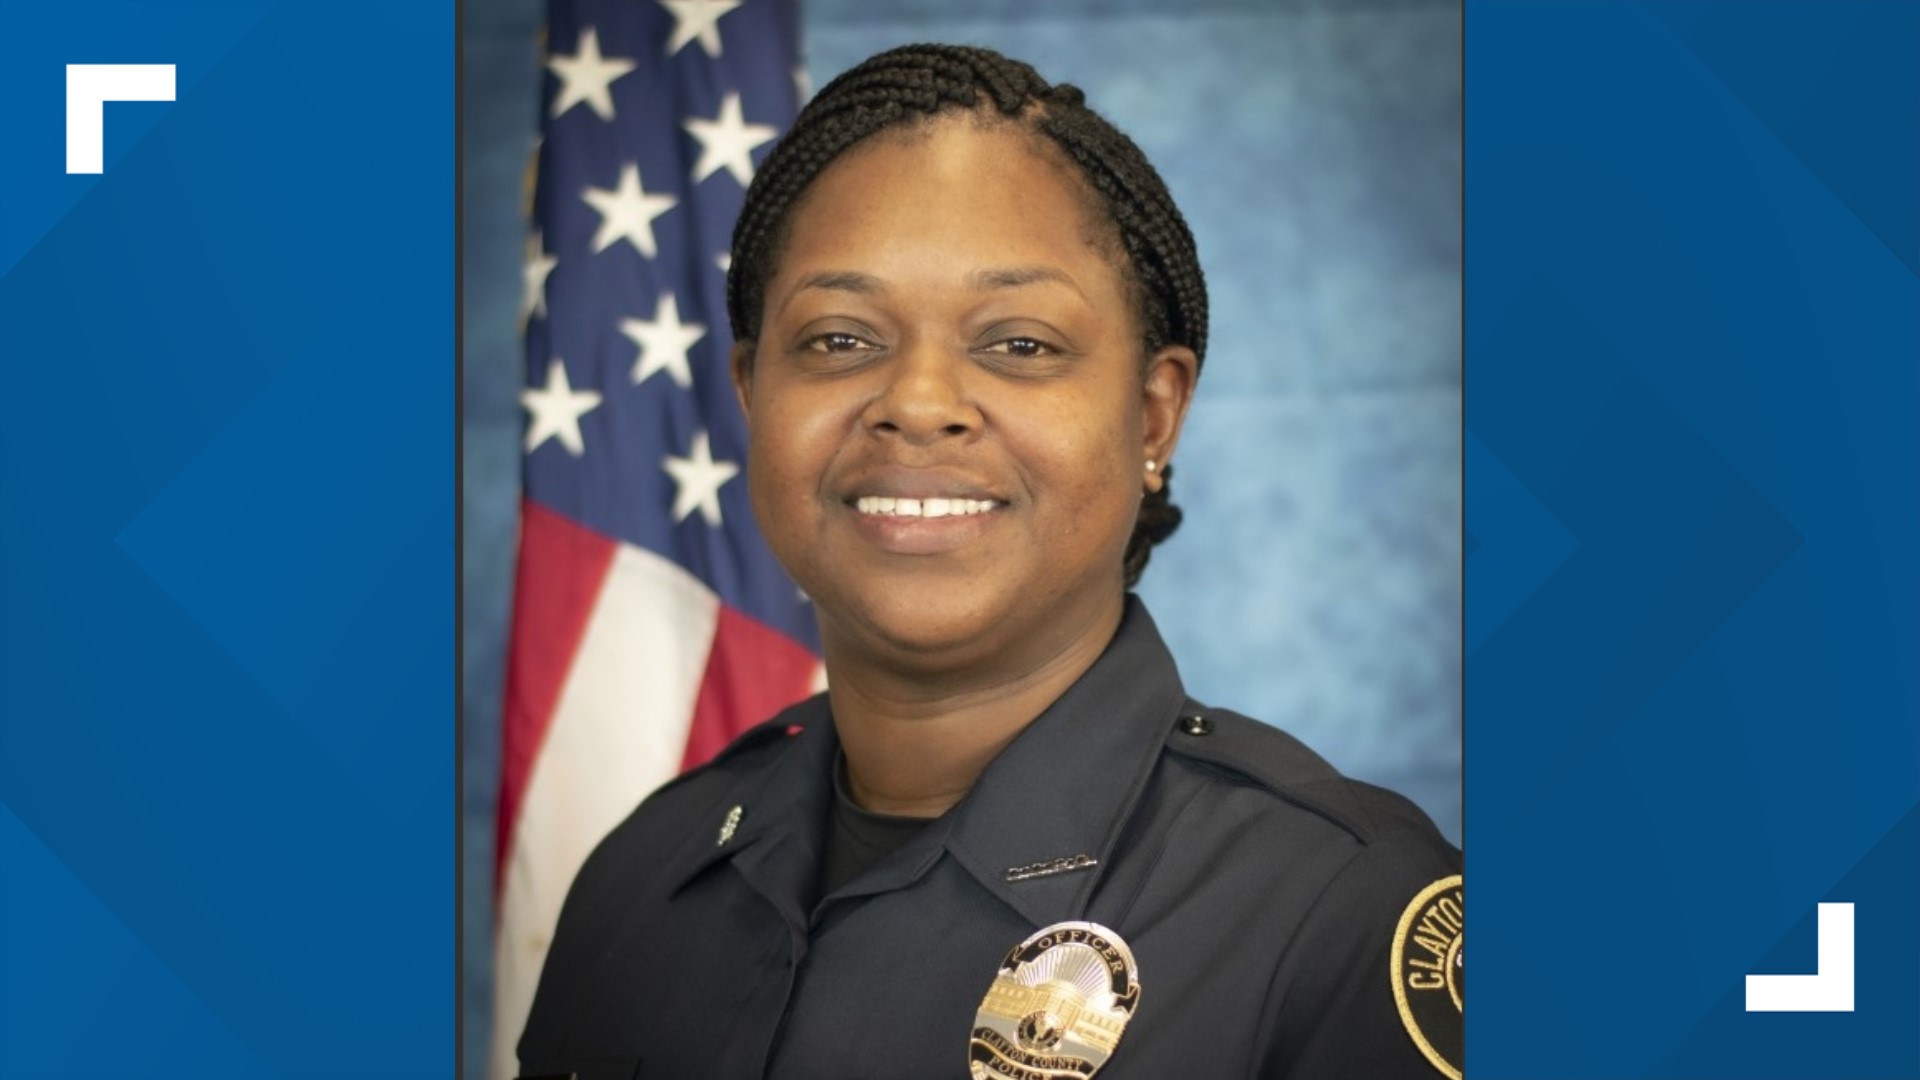 Here's what her former colleague and friend had to say about Officer Demika Lloyd.